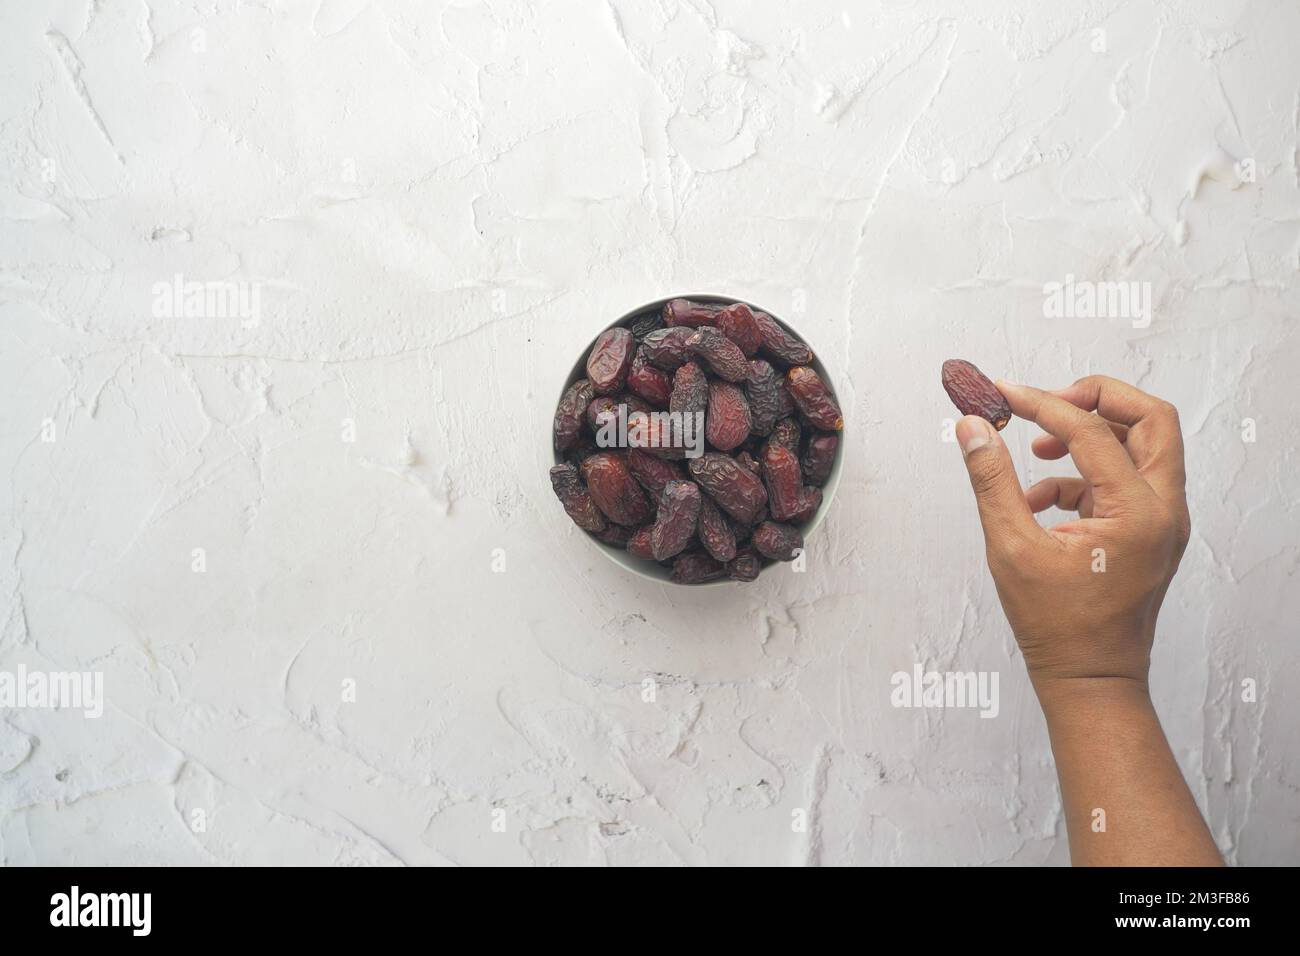 hand pick a dried date fruit from a bowl  Stock Photo